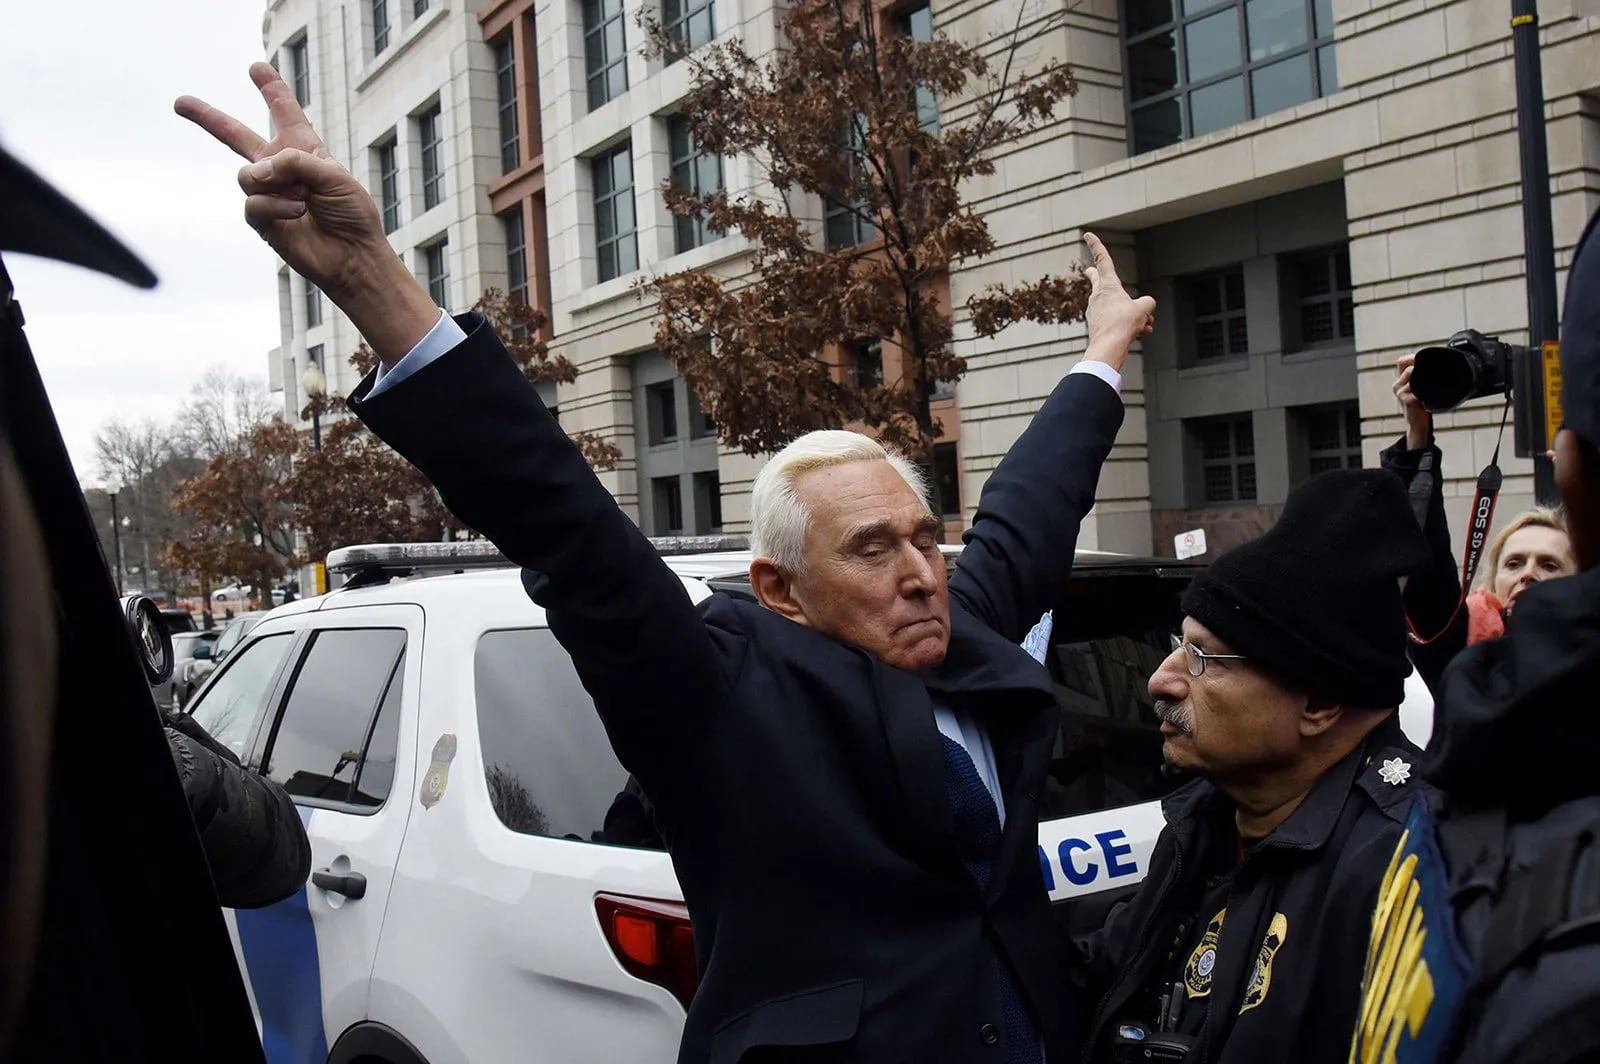 Roger Stone, a longtime adviser to then President Donald Trump, gestures as he leaves the Prettyman United States Courthouse in Washington, D.C., after facing charges from Special Counsel Robert Mueller that he lied to Congress and engaged in witness tampering, on Jan. 29, 2019. Stone was convicted but later pardoned by Trump. He is now under investigation for a possible role in instigating the Capitol riots.